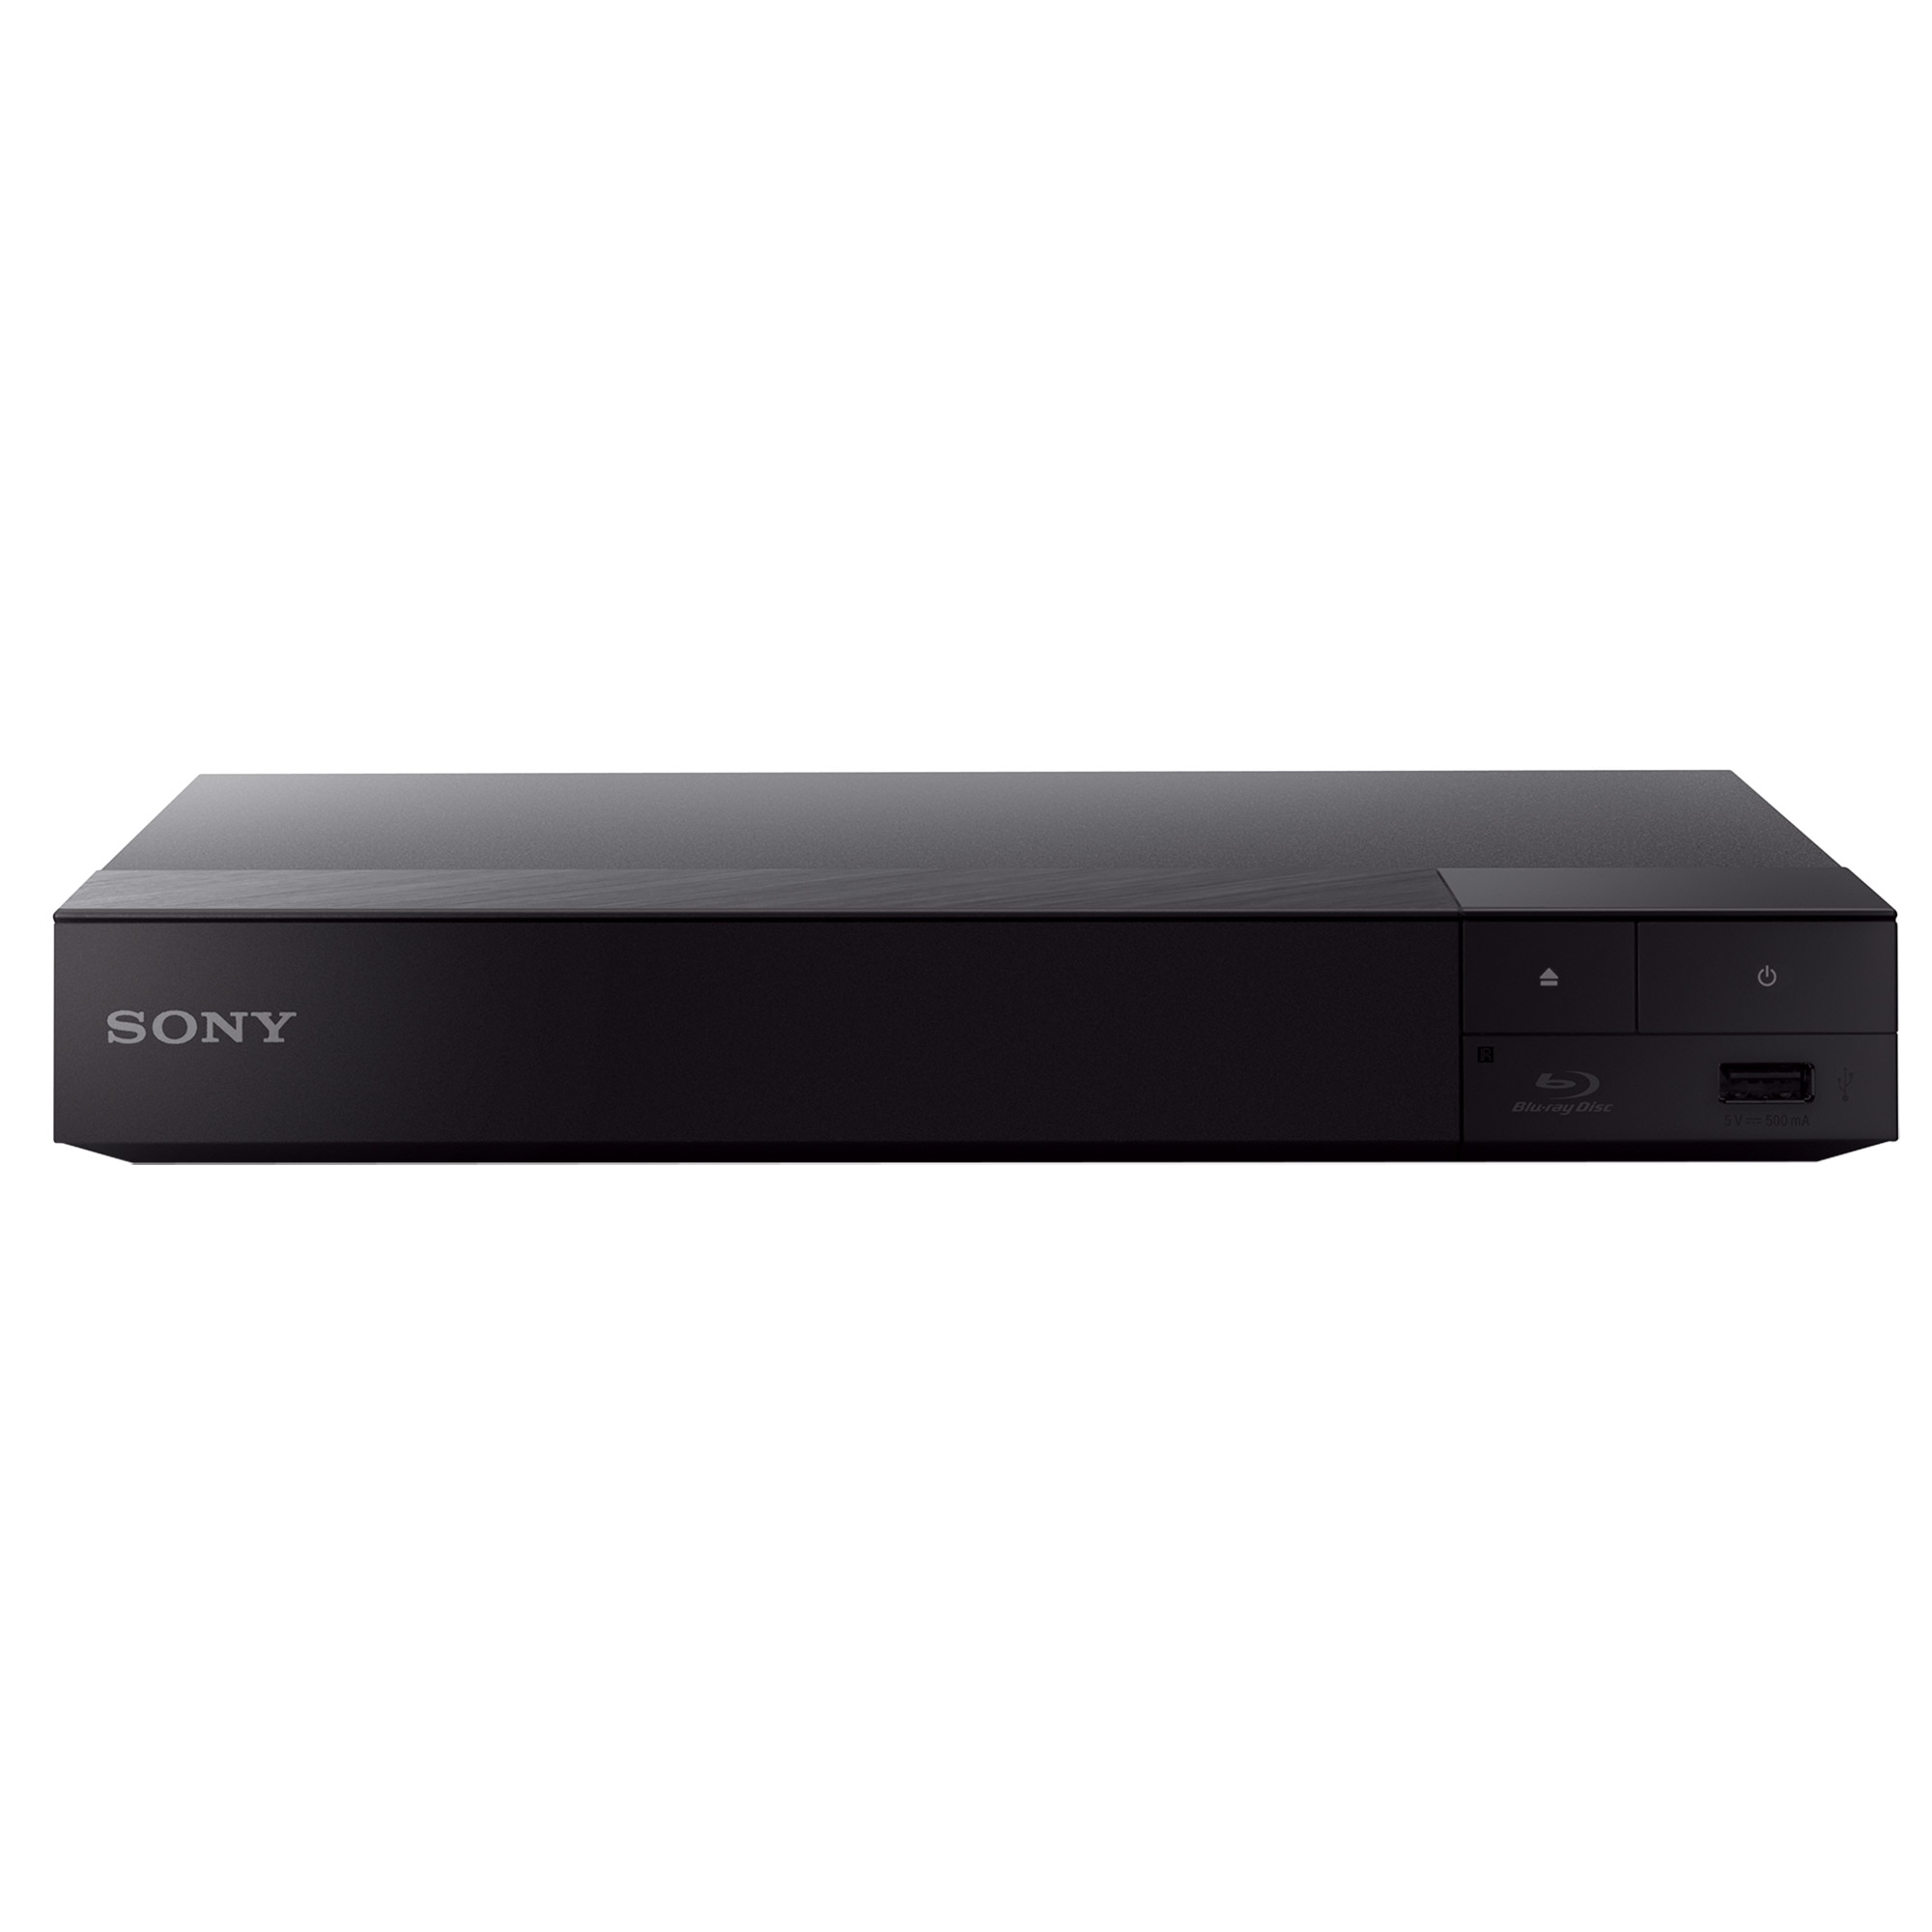 Achievable Blame half past seven Blu-ray Player Sony BDPS6700, 4K upscaling, Smart, CD/DVD Player - eMAG.ro